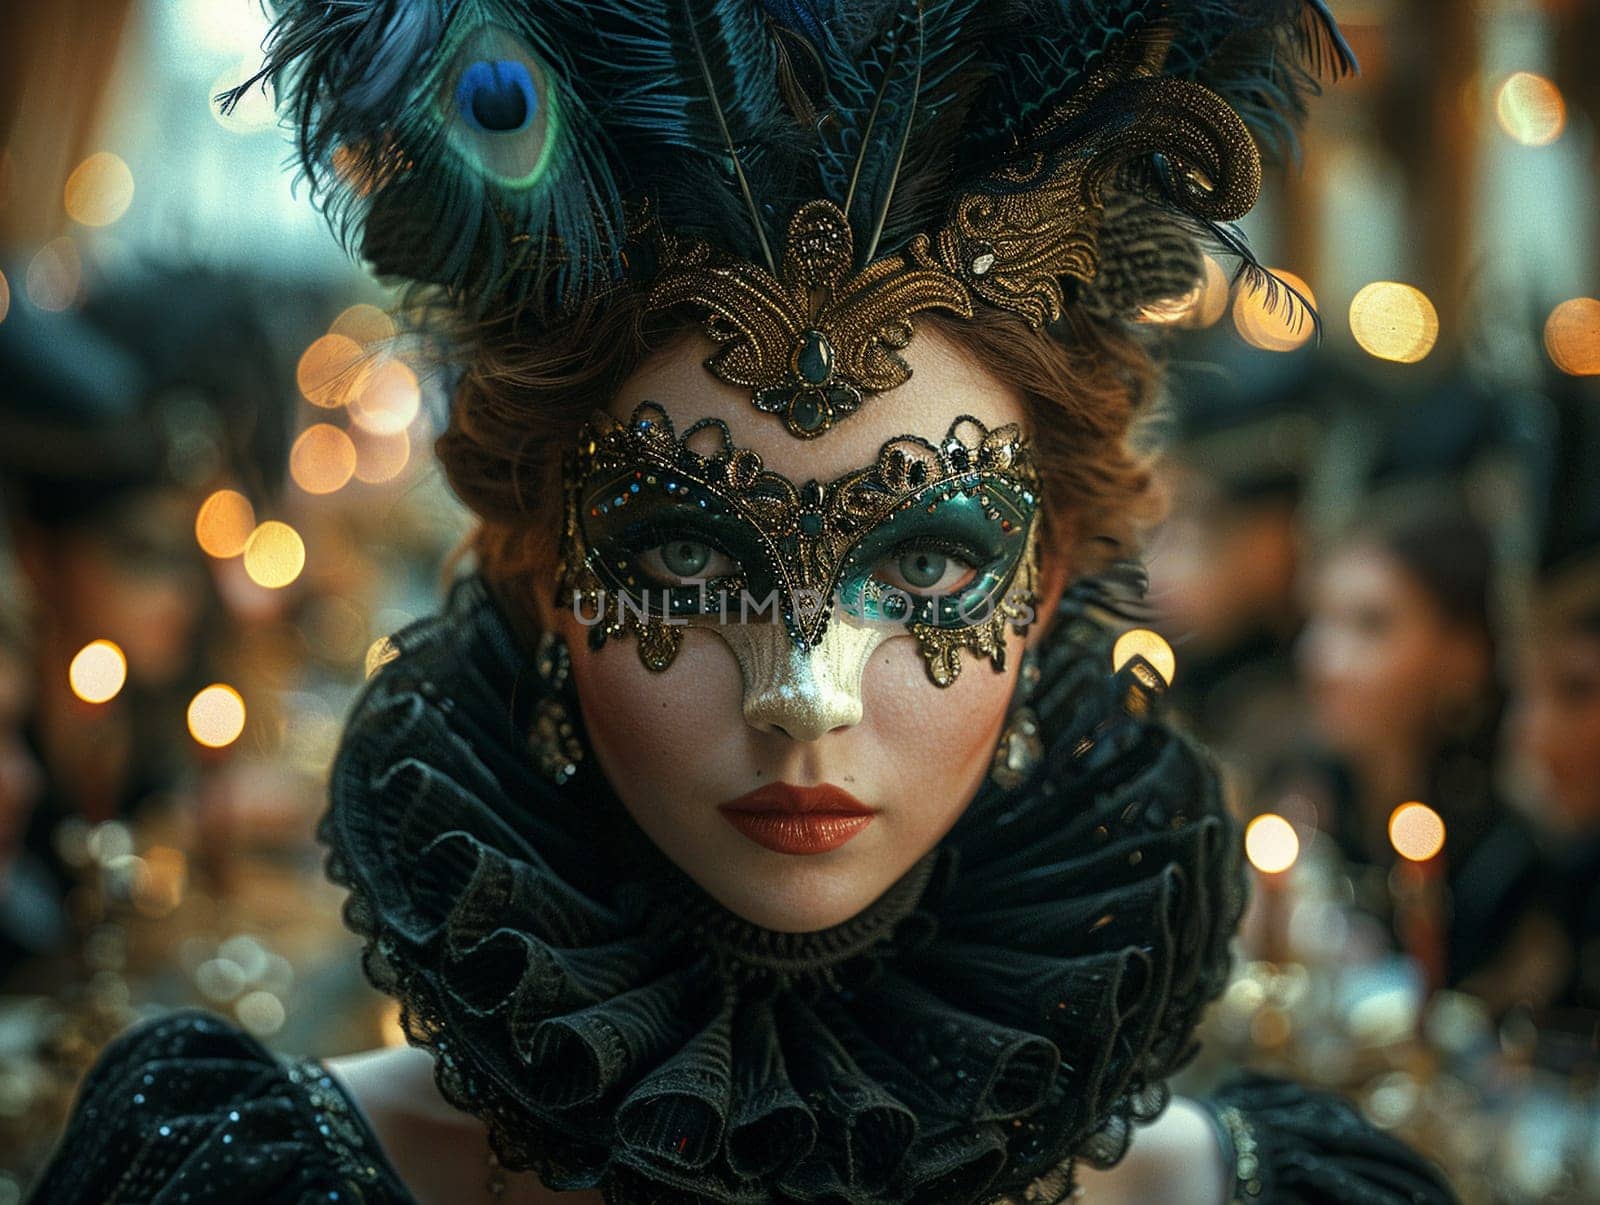 A masquerade where each mask is a universe, the ballroom a dance of worlds colliding.